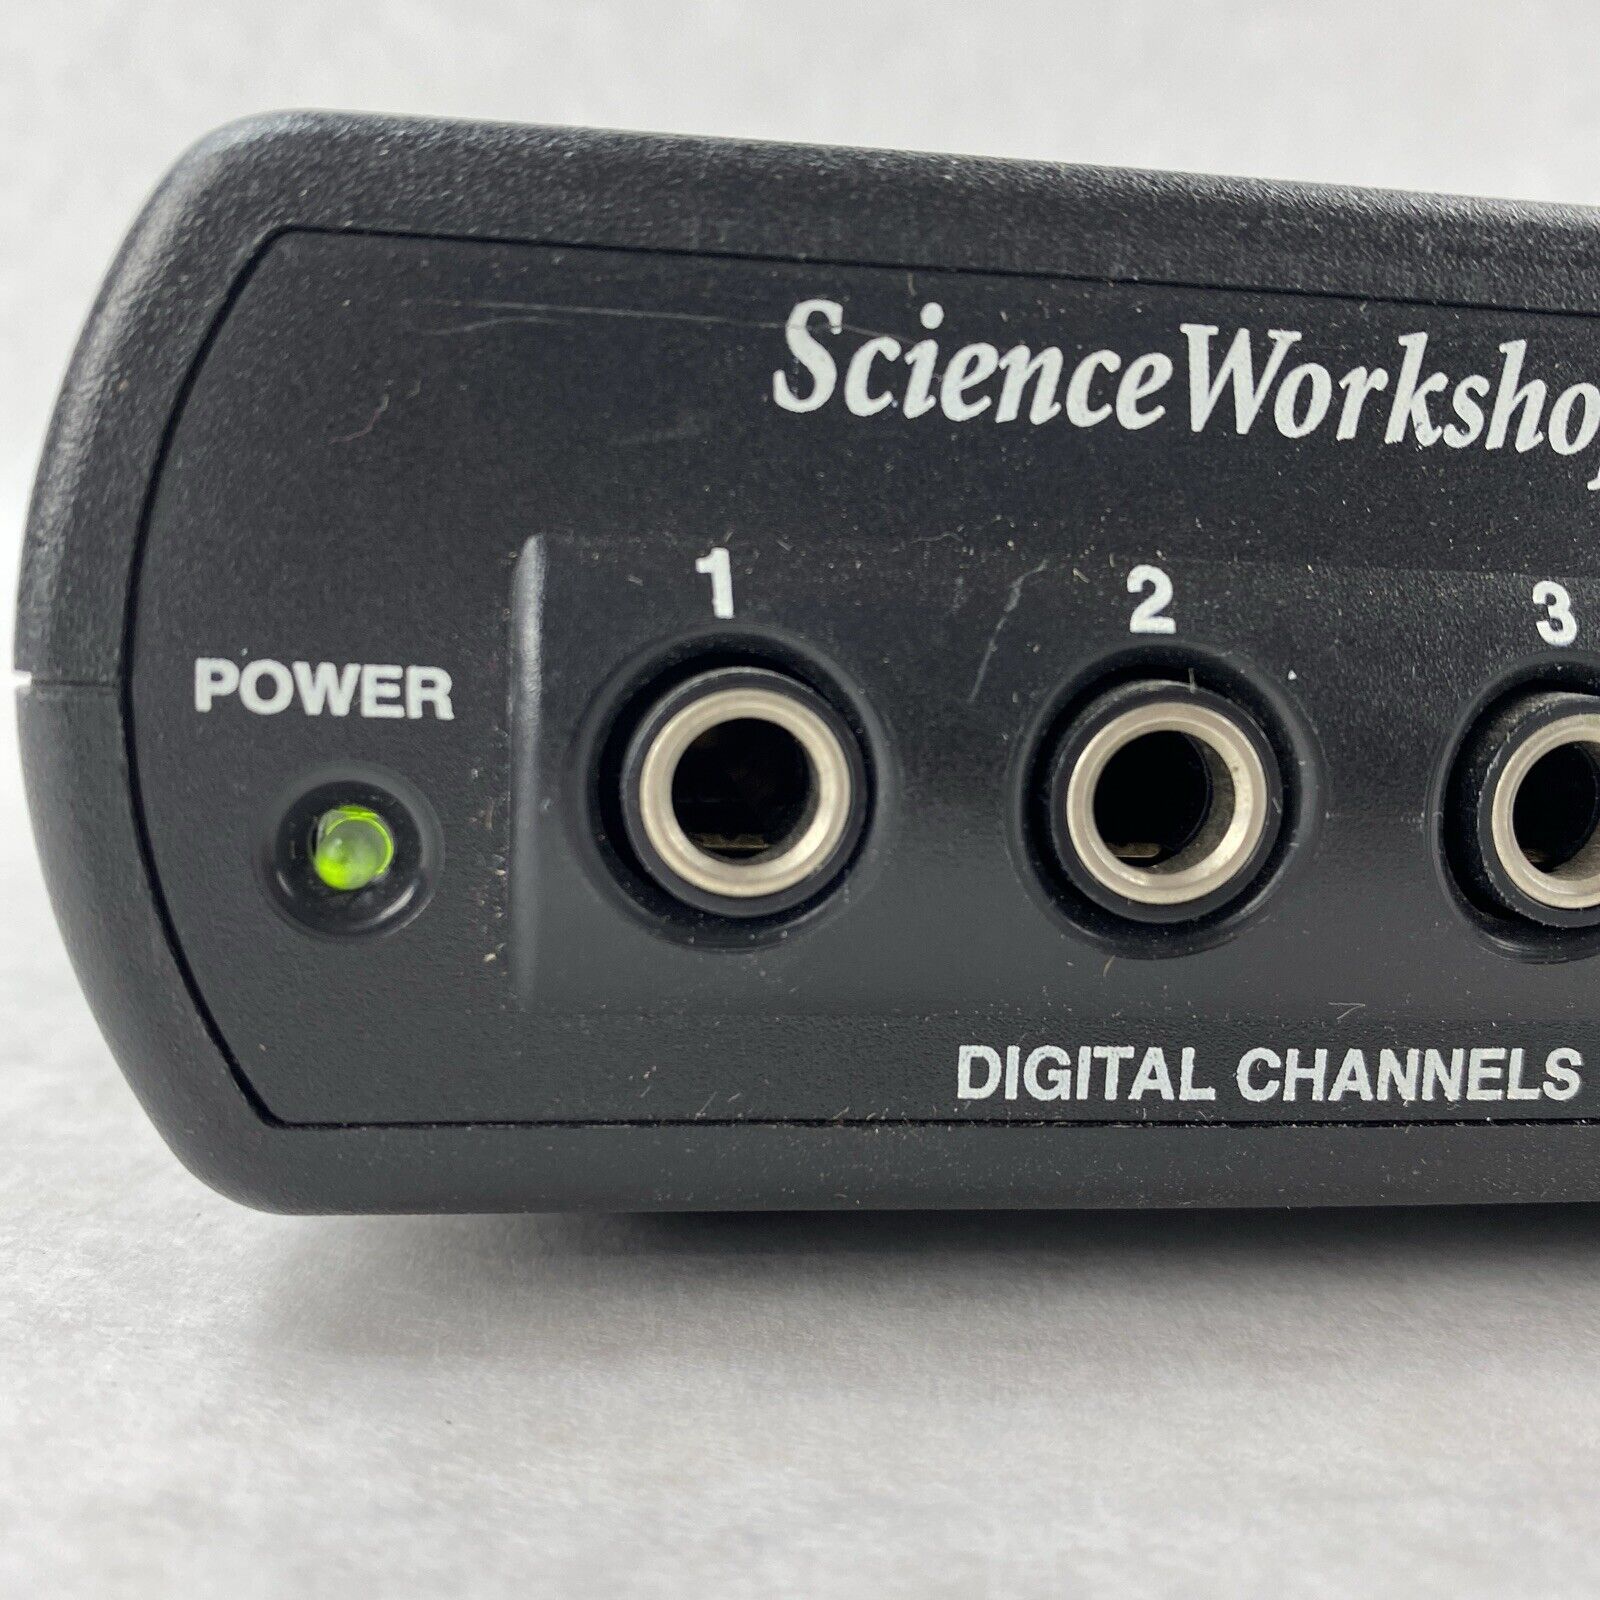 Pasco CI-7500 Scientific Workshop 750 Interface USB-B with Power Adapter